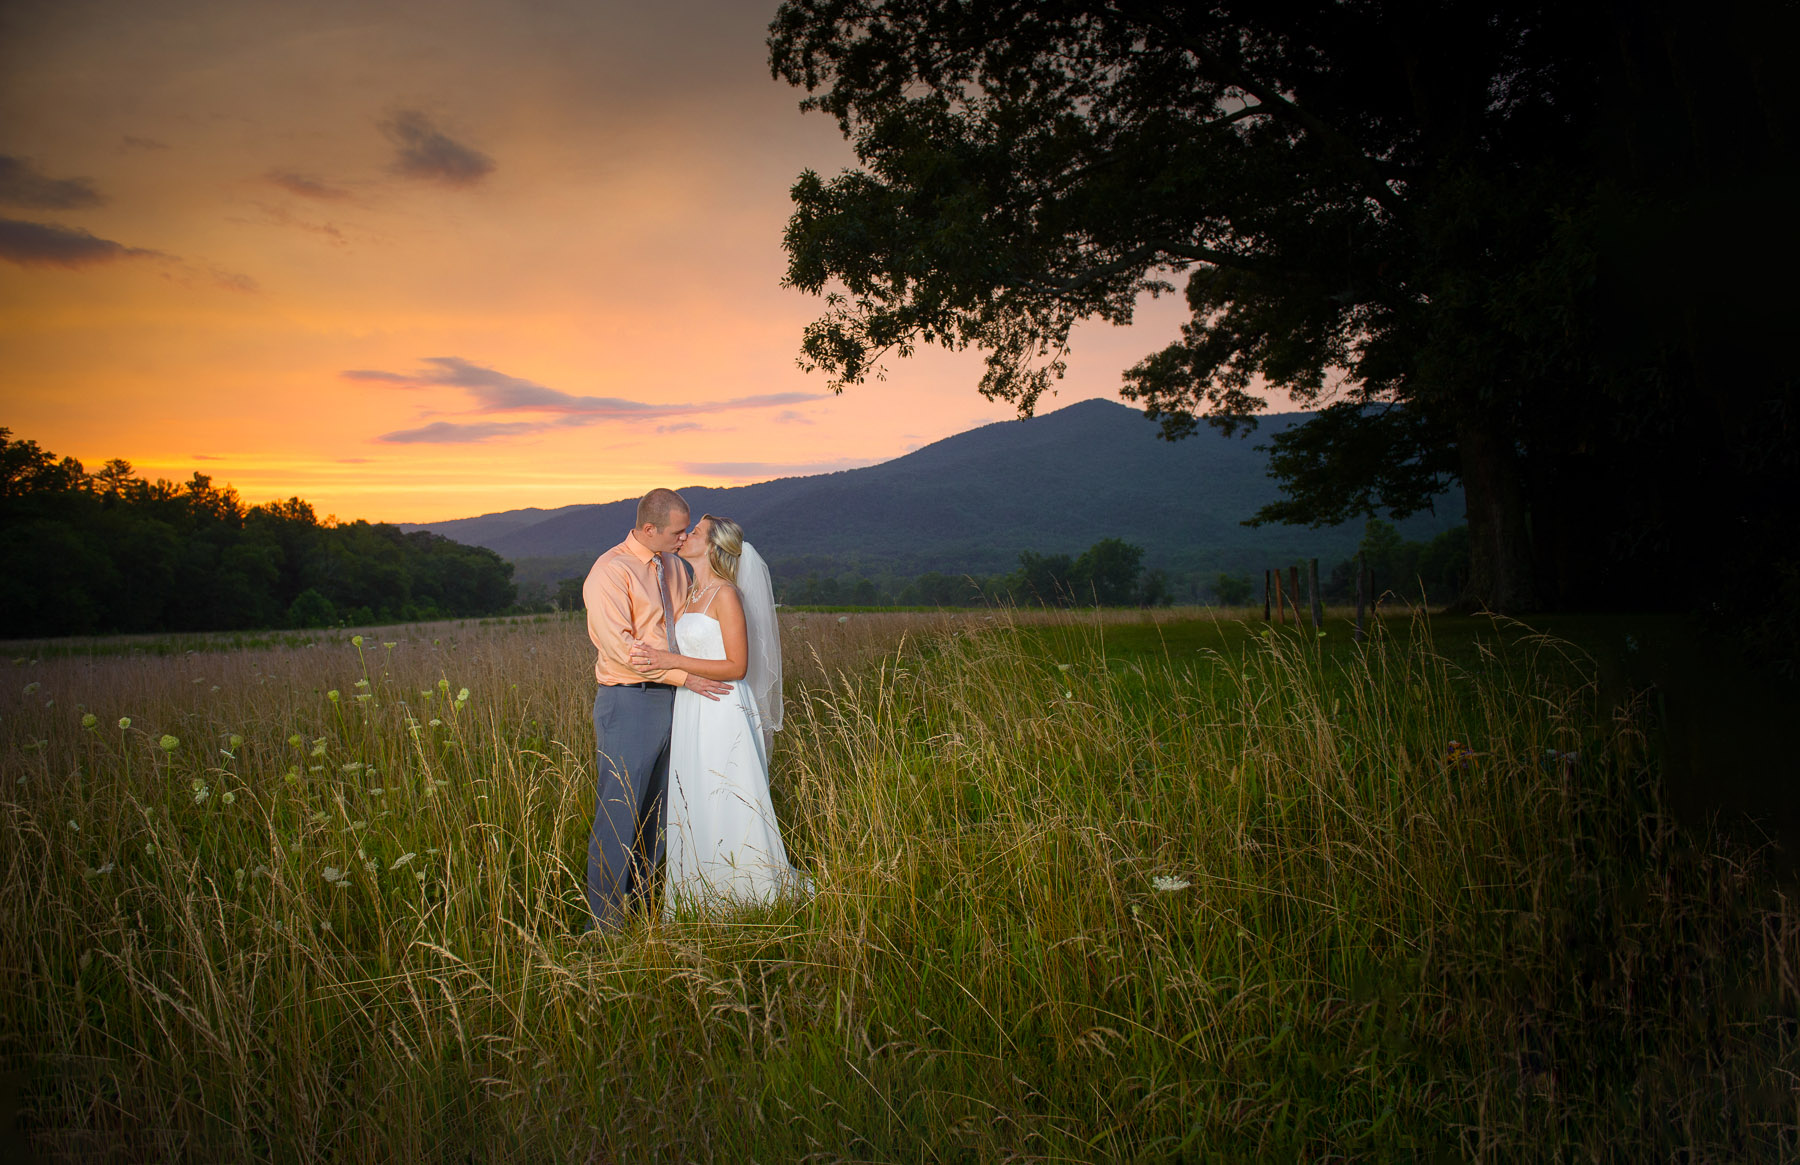 Cades Cove wedding and Elopement packages at LeQuire Feild overlook